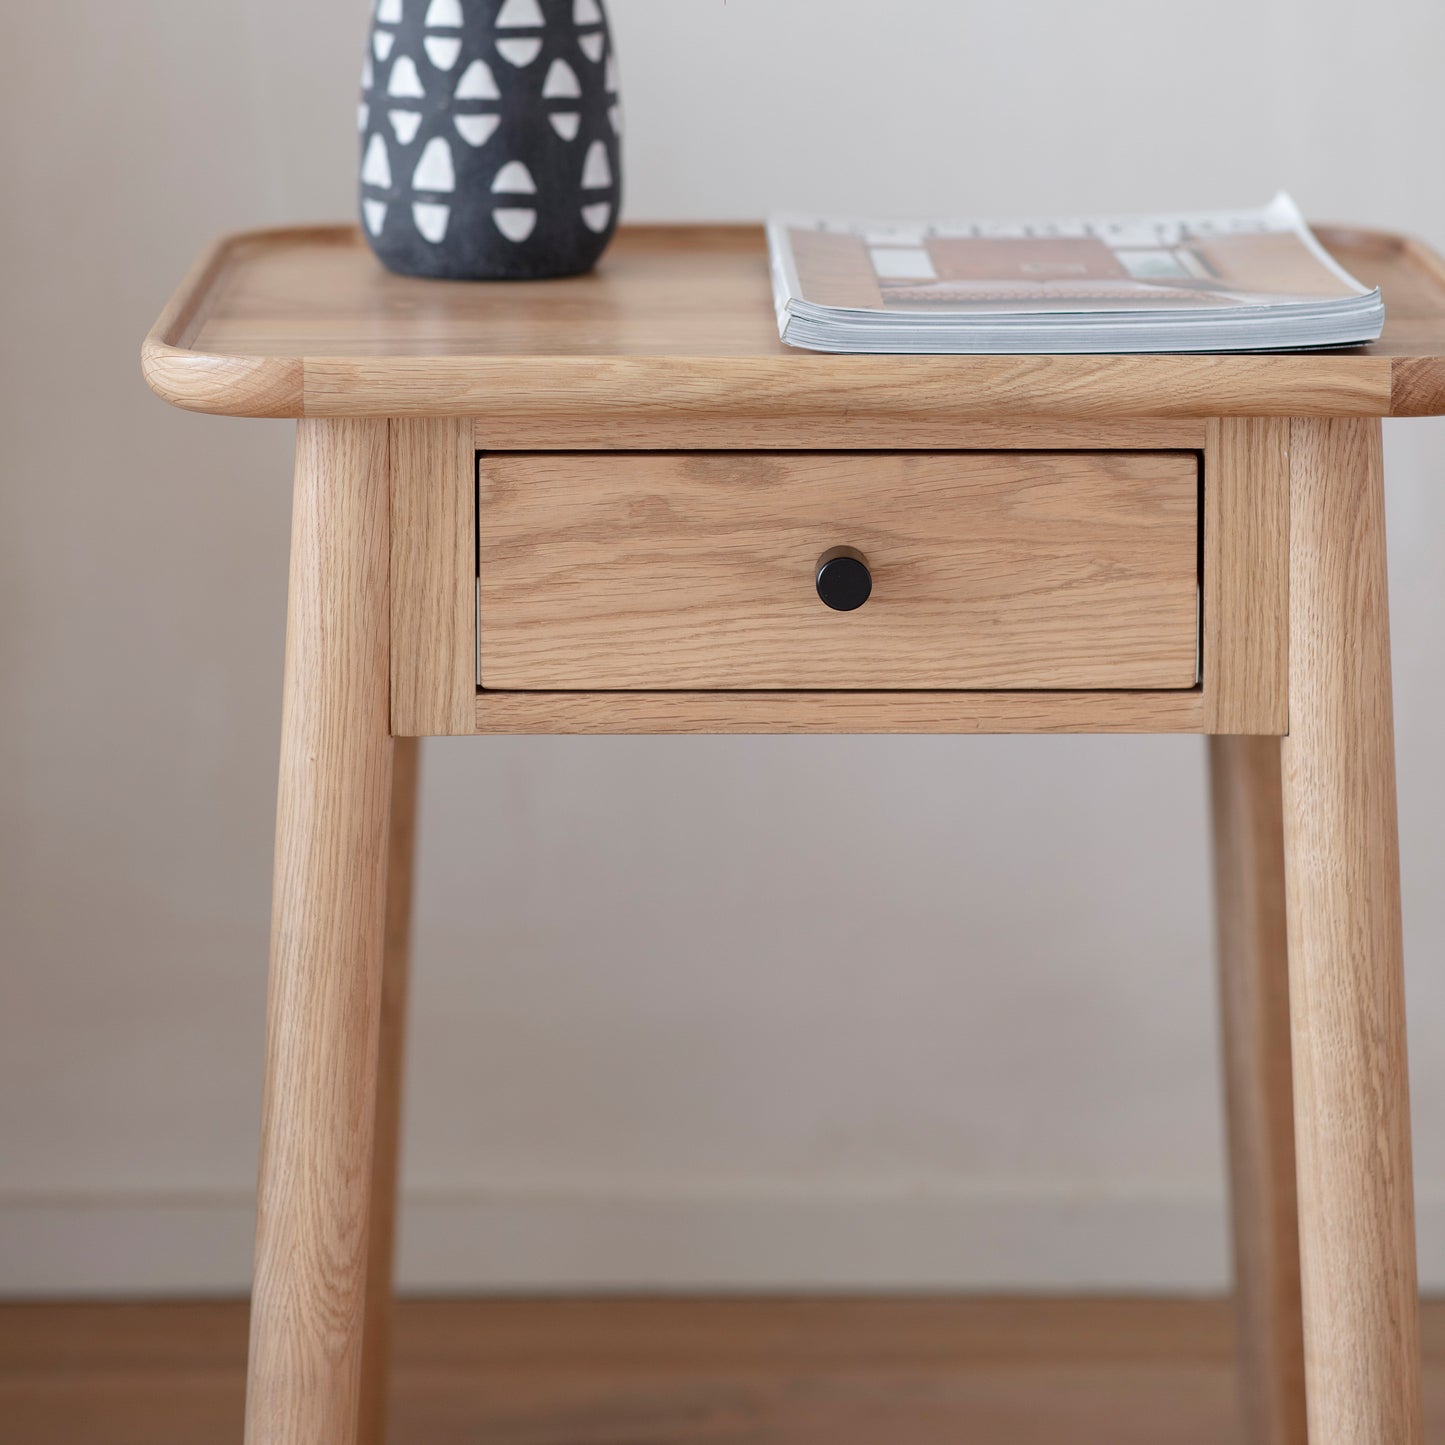 A Wembury 1 Drawer Side Table 500x400x550mm with a drawer and a vase, perfect for interior decor or home furniture, available at Kikiathome.co.uk.